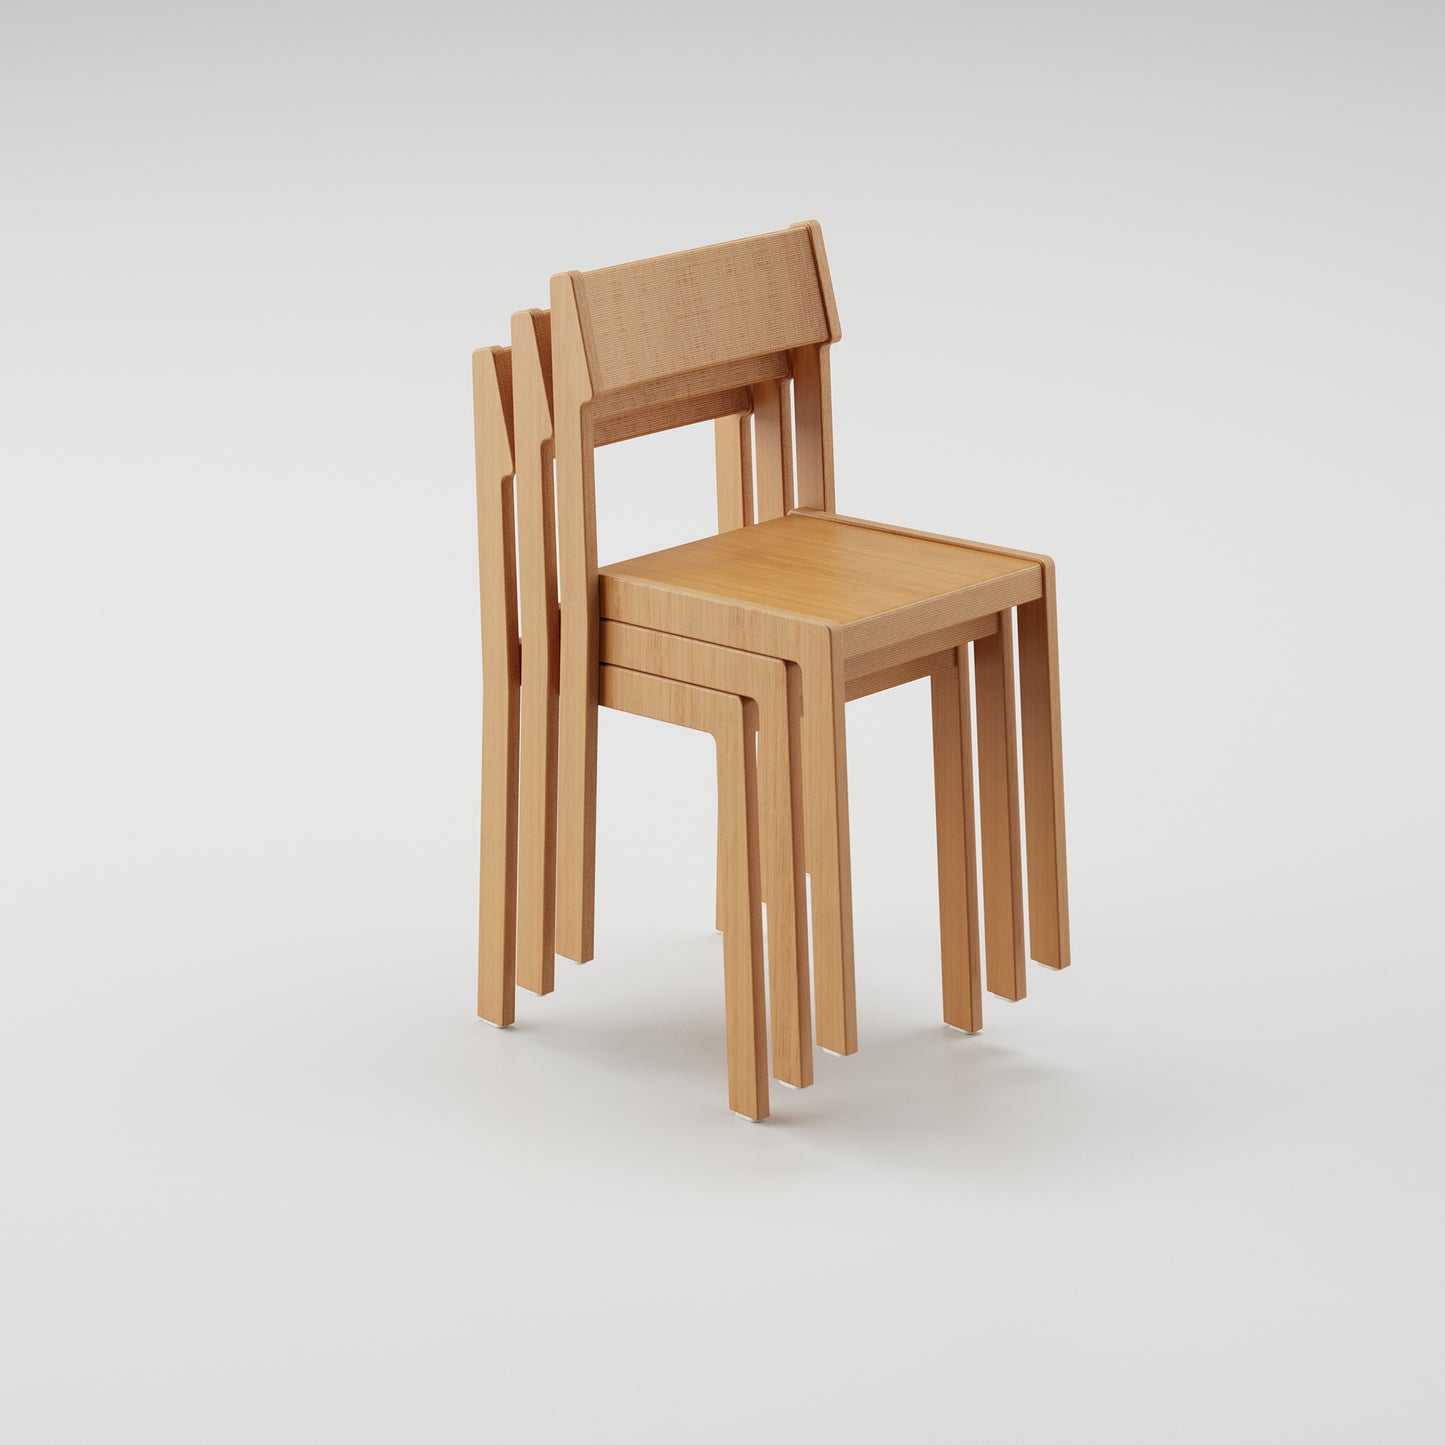 ARRIVAL CHAIR by studio re.d - REDUCE.DESIGN